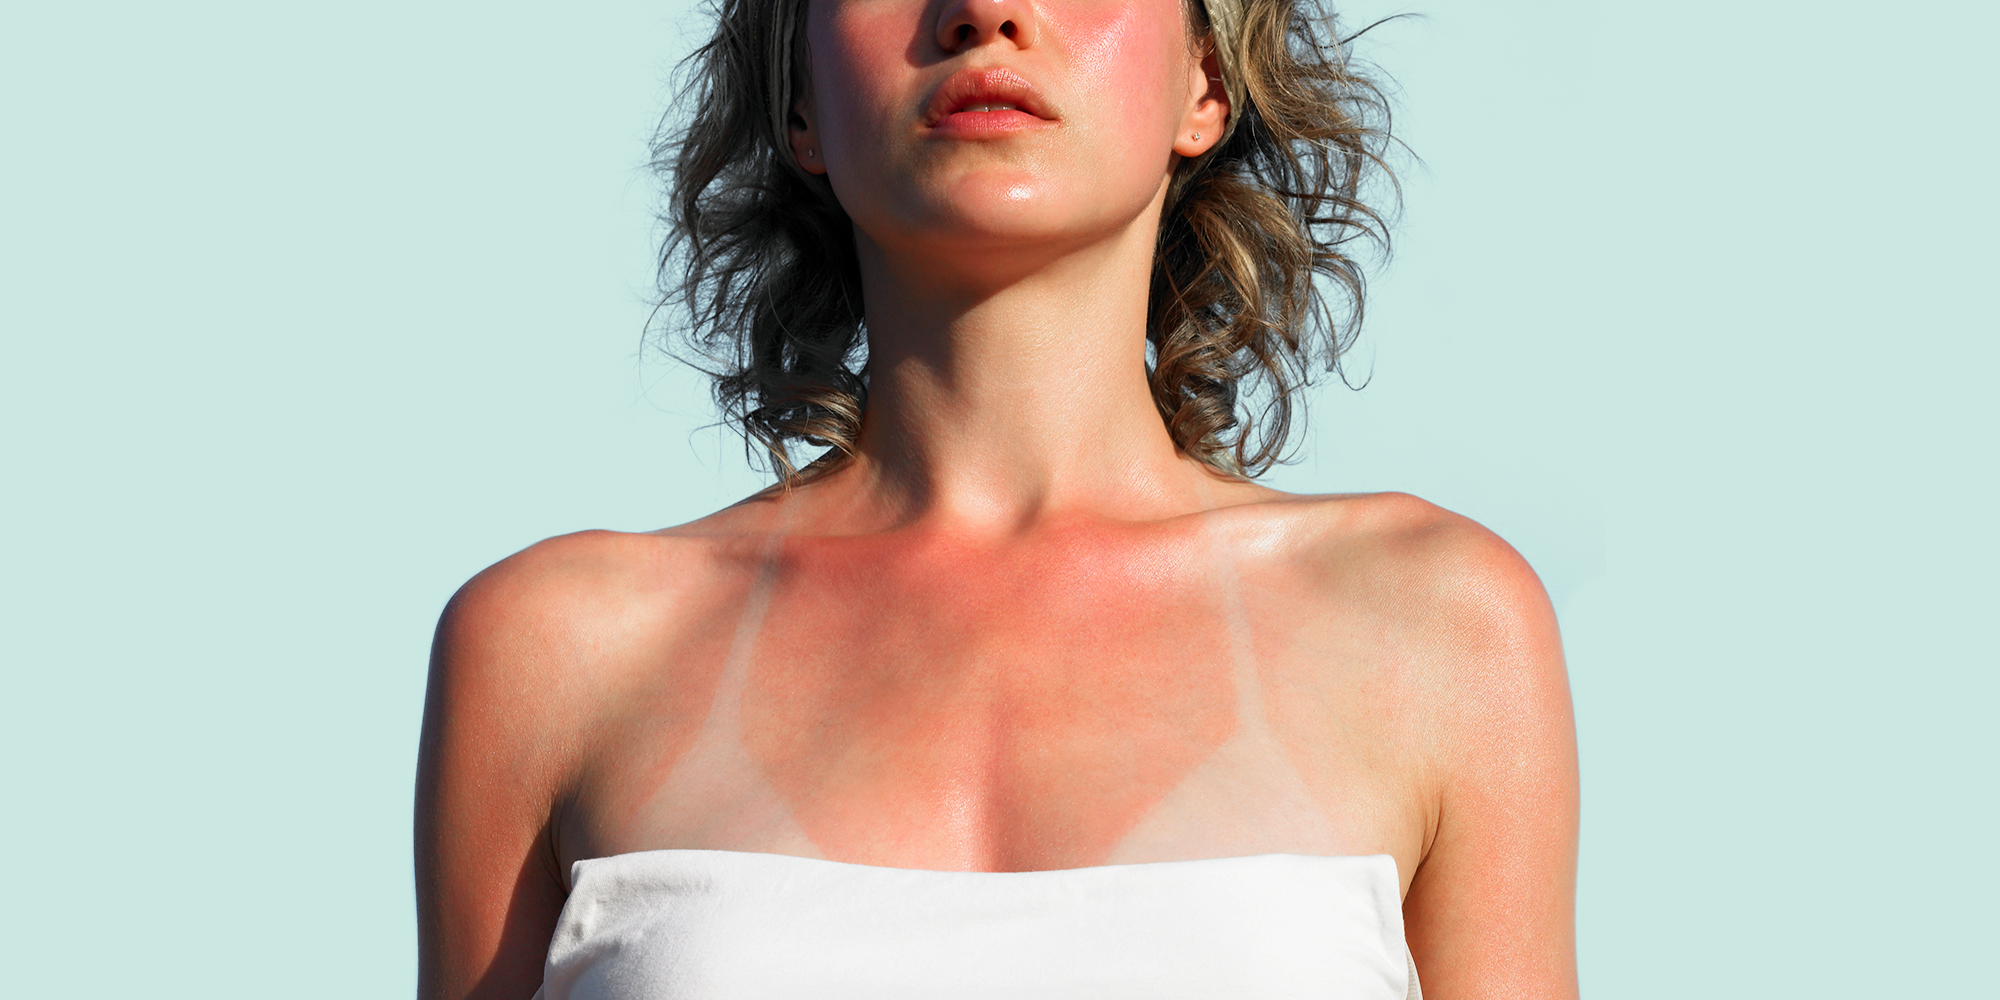 Natural sunscreens and natural treatment for sunburn! — Feelgood